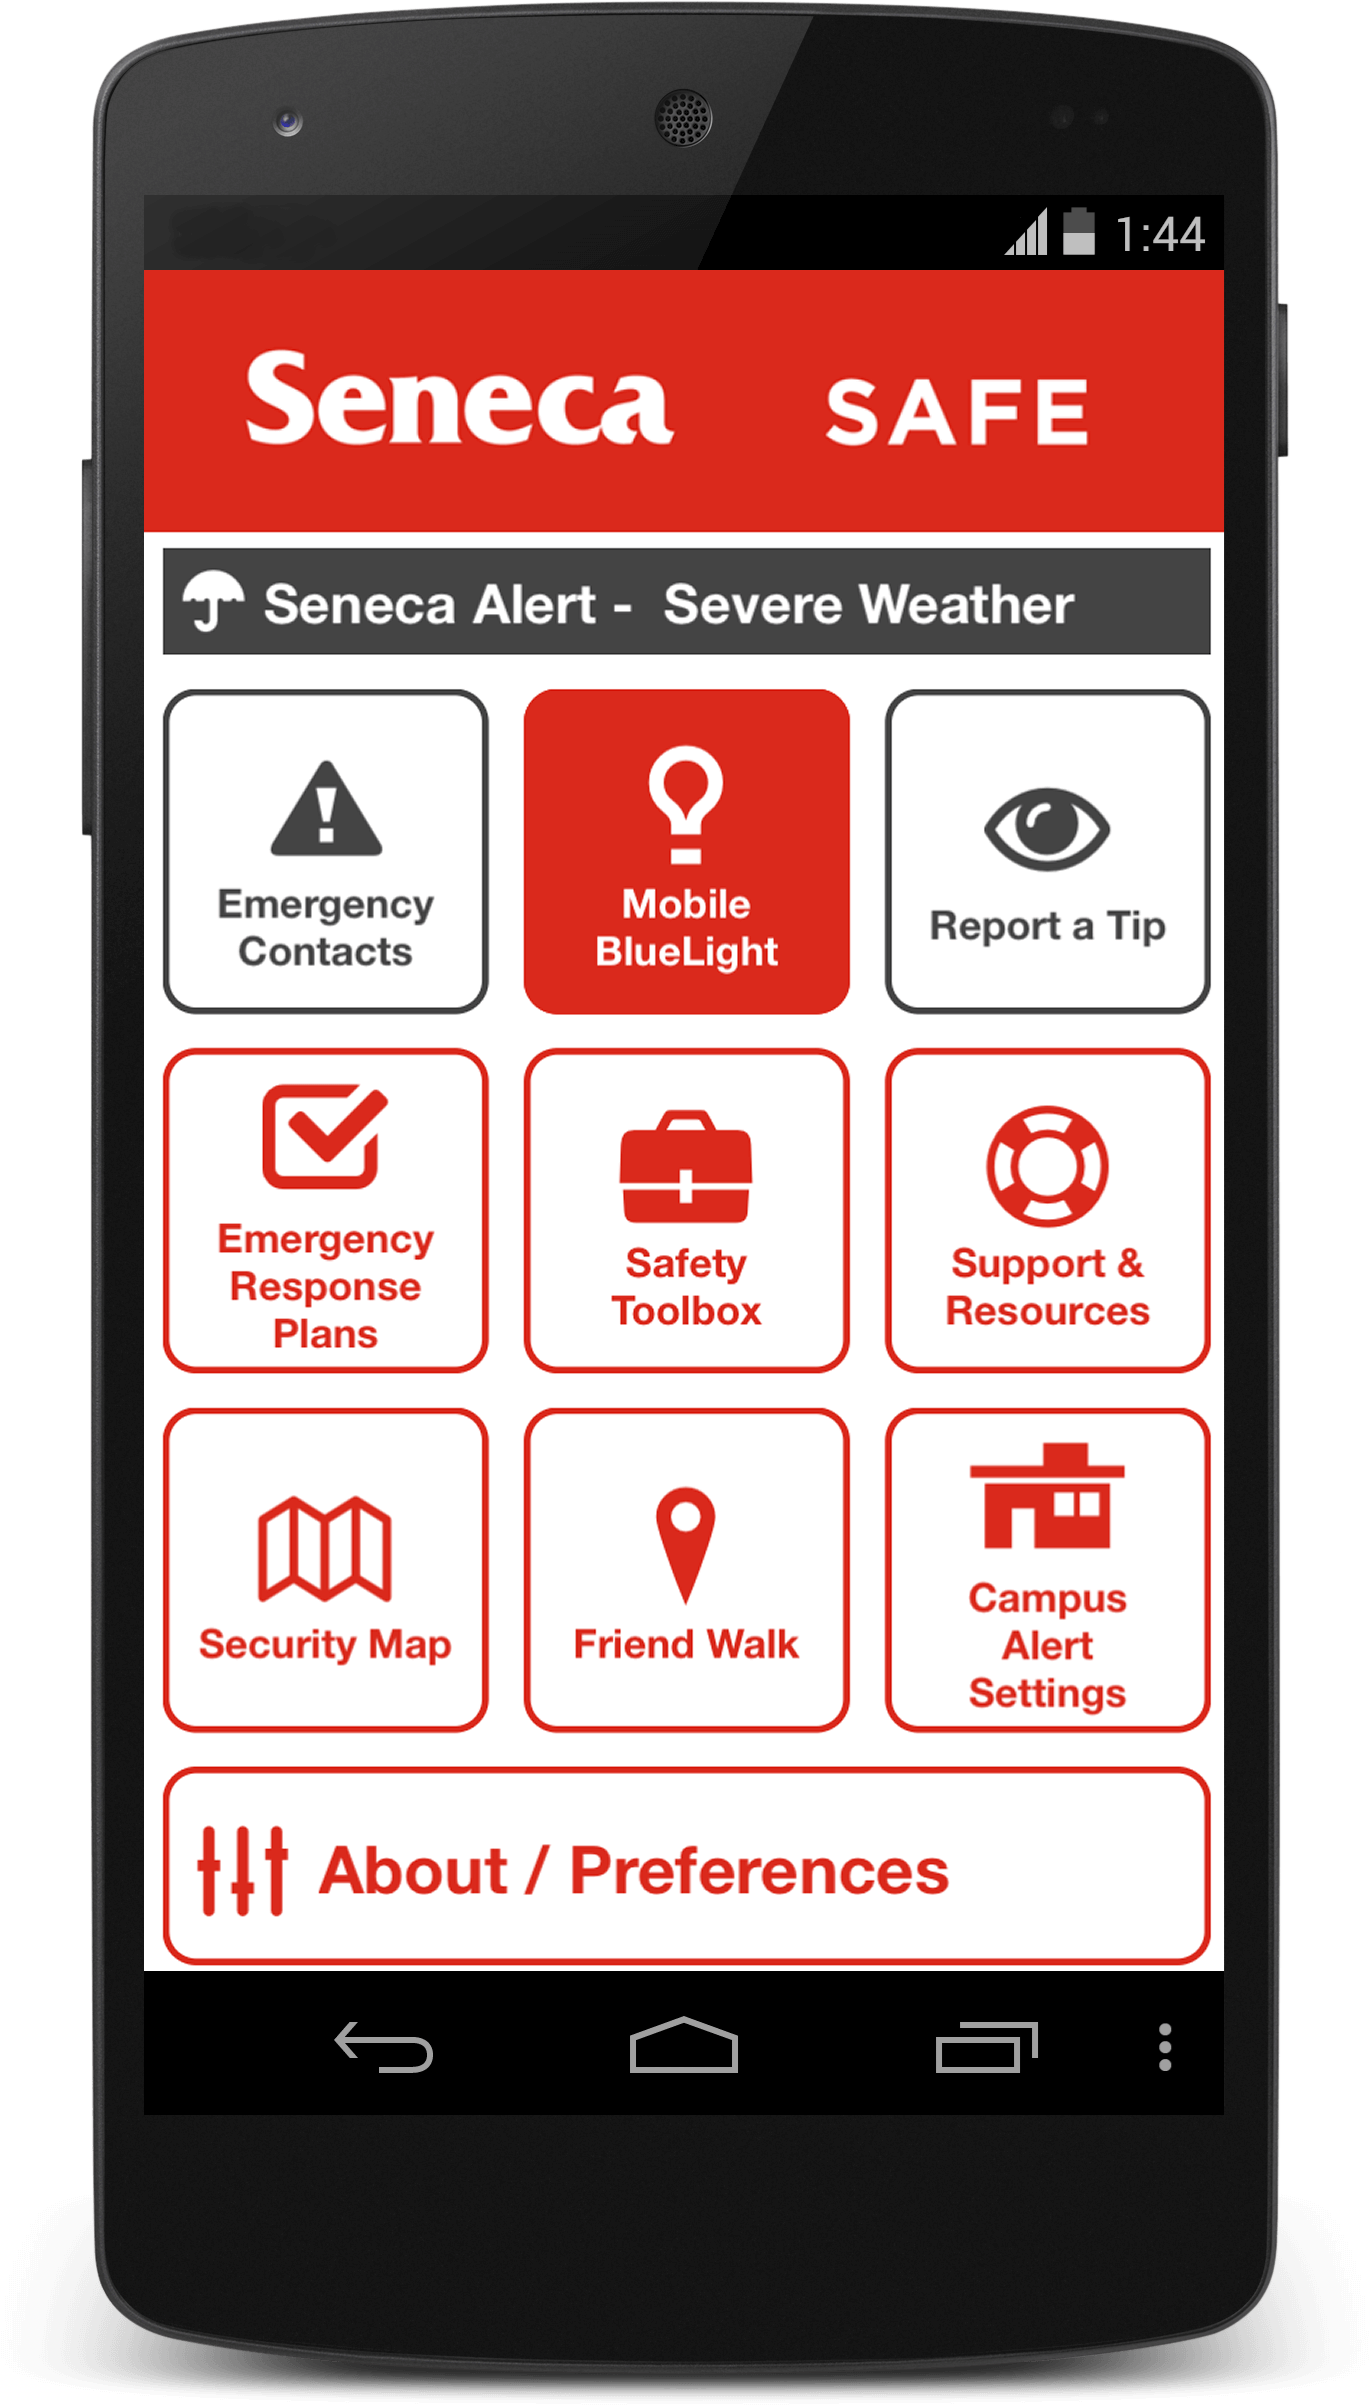 The homescreen of the Seneca Safe App, as displayed on a smartphone